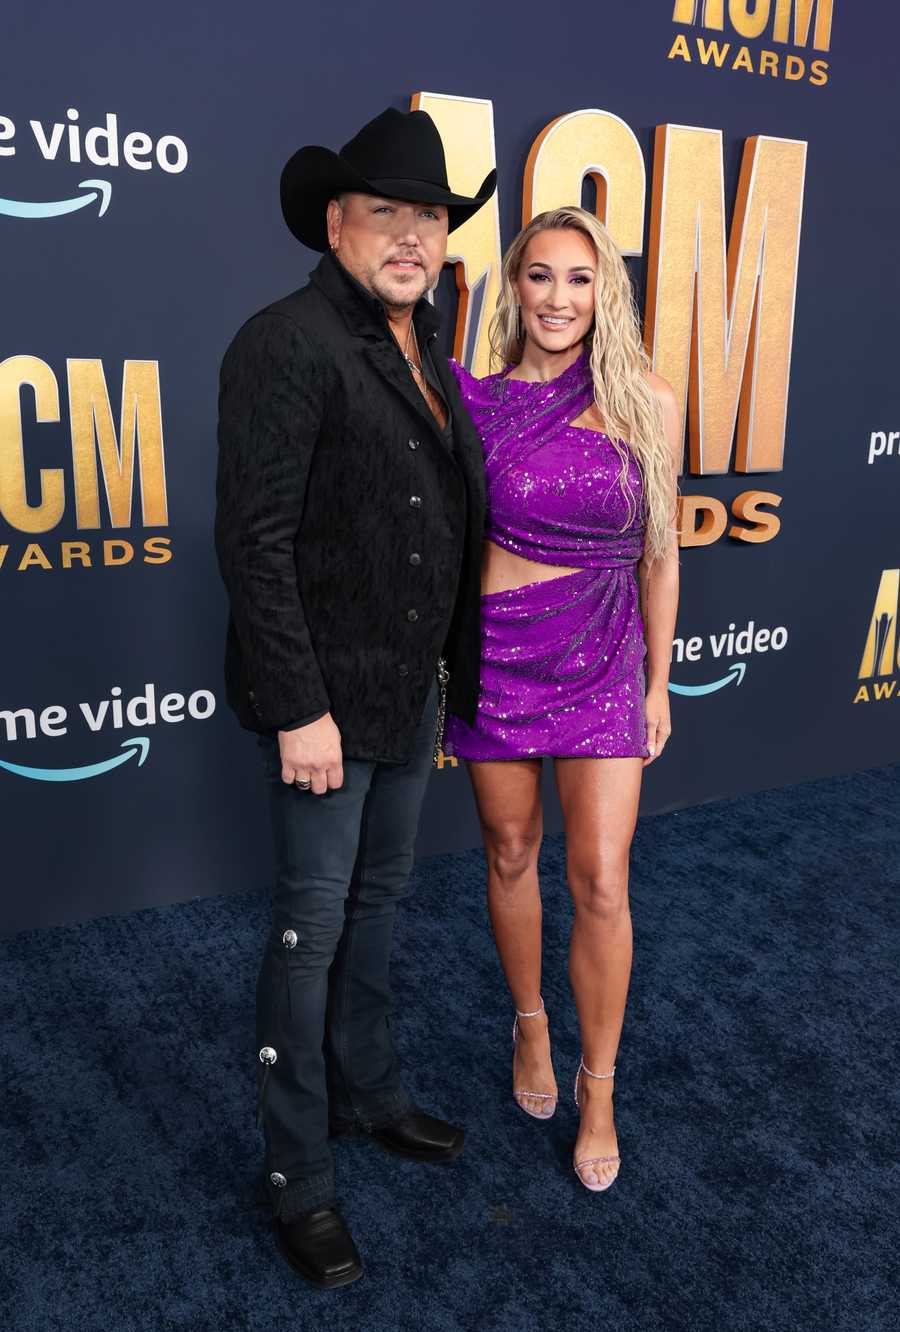 Academy of Country Music Awards 2022: Carrie Underwood and Maren Morris  lead red carpet arrivals